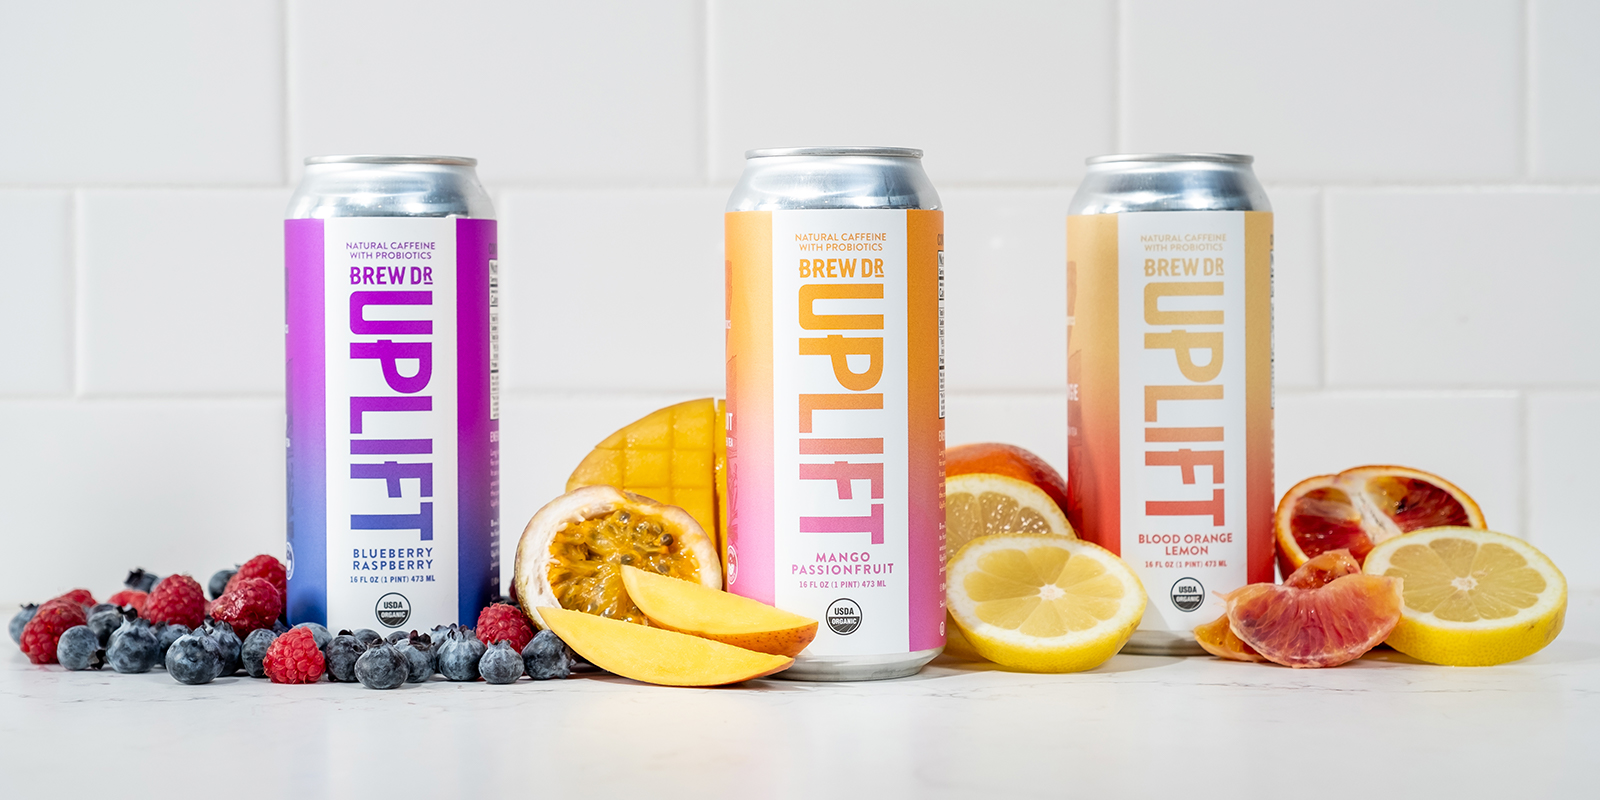 The three cans, Blueberry Raspberry, Mango Passionfruit, and Blood Orange Lemon, lined up on a counter surrounded by the fresh fruit that makes up their ingredients. Each has a white front panel with knocked-out vertical version of the Uplift logo so the gradient behind, which wraps around the whole can, shows through. The Blueberry Raspberry gradient is a dark blue to purple, the Mango Passionfruit a pink to orange, and the Blood Orange Lemon a red-orange to yellow.